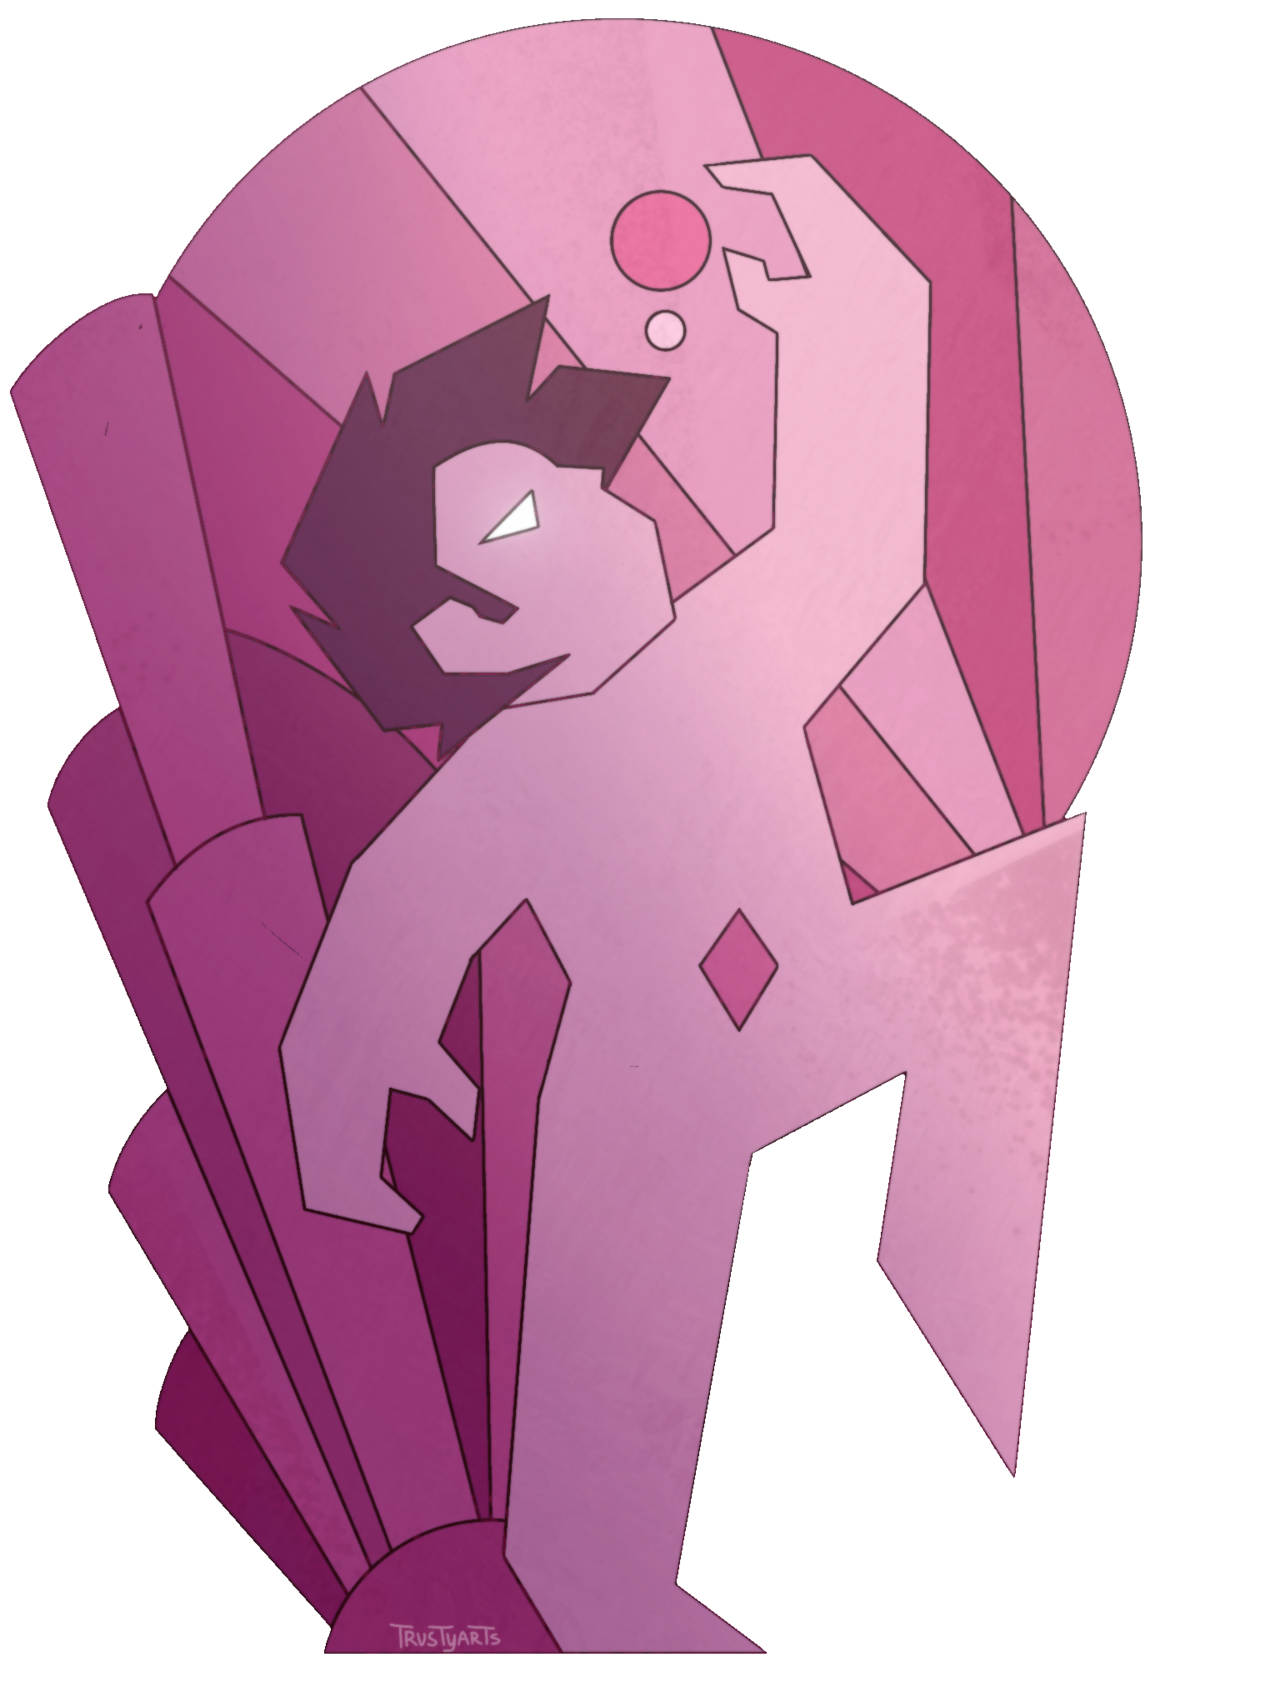 I got time and finished Steven’s Diamond mural. It’s been long time since reveal that Rose Quartz is PD.